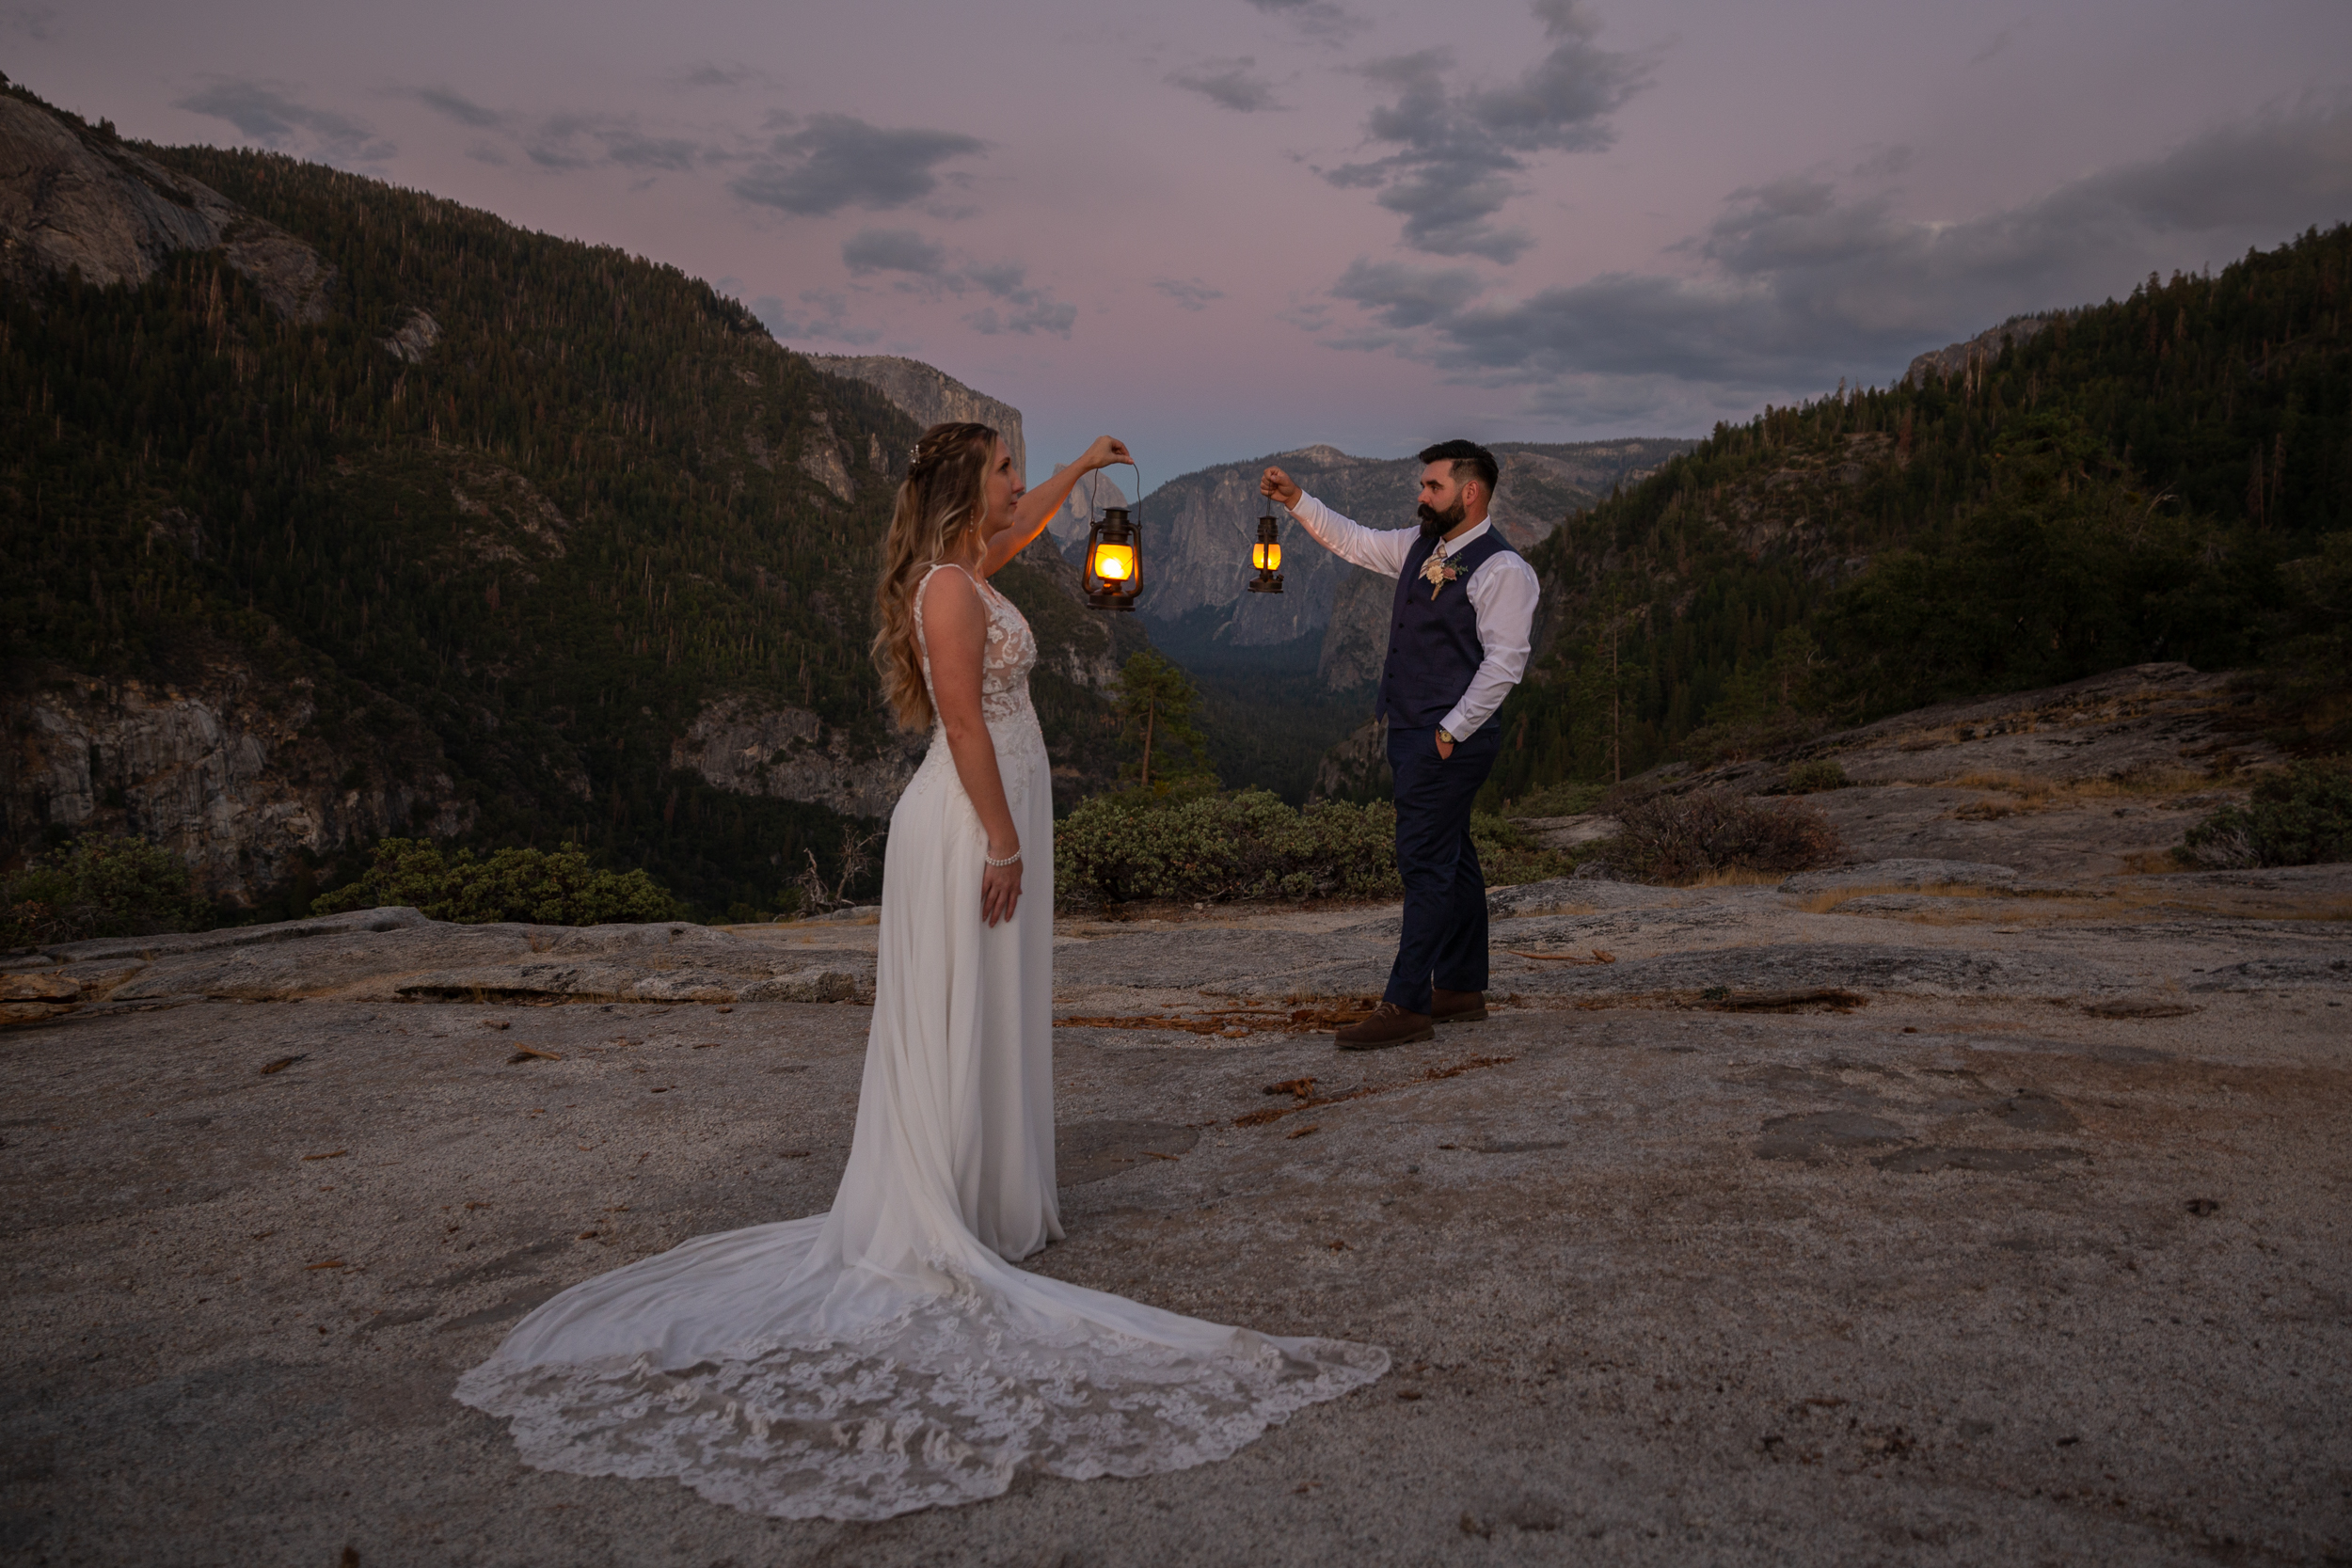 Bride & Groom hold lanterns in the fading light with Yosemite Valley and pink skies in the background.